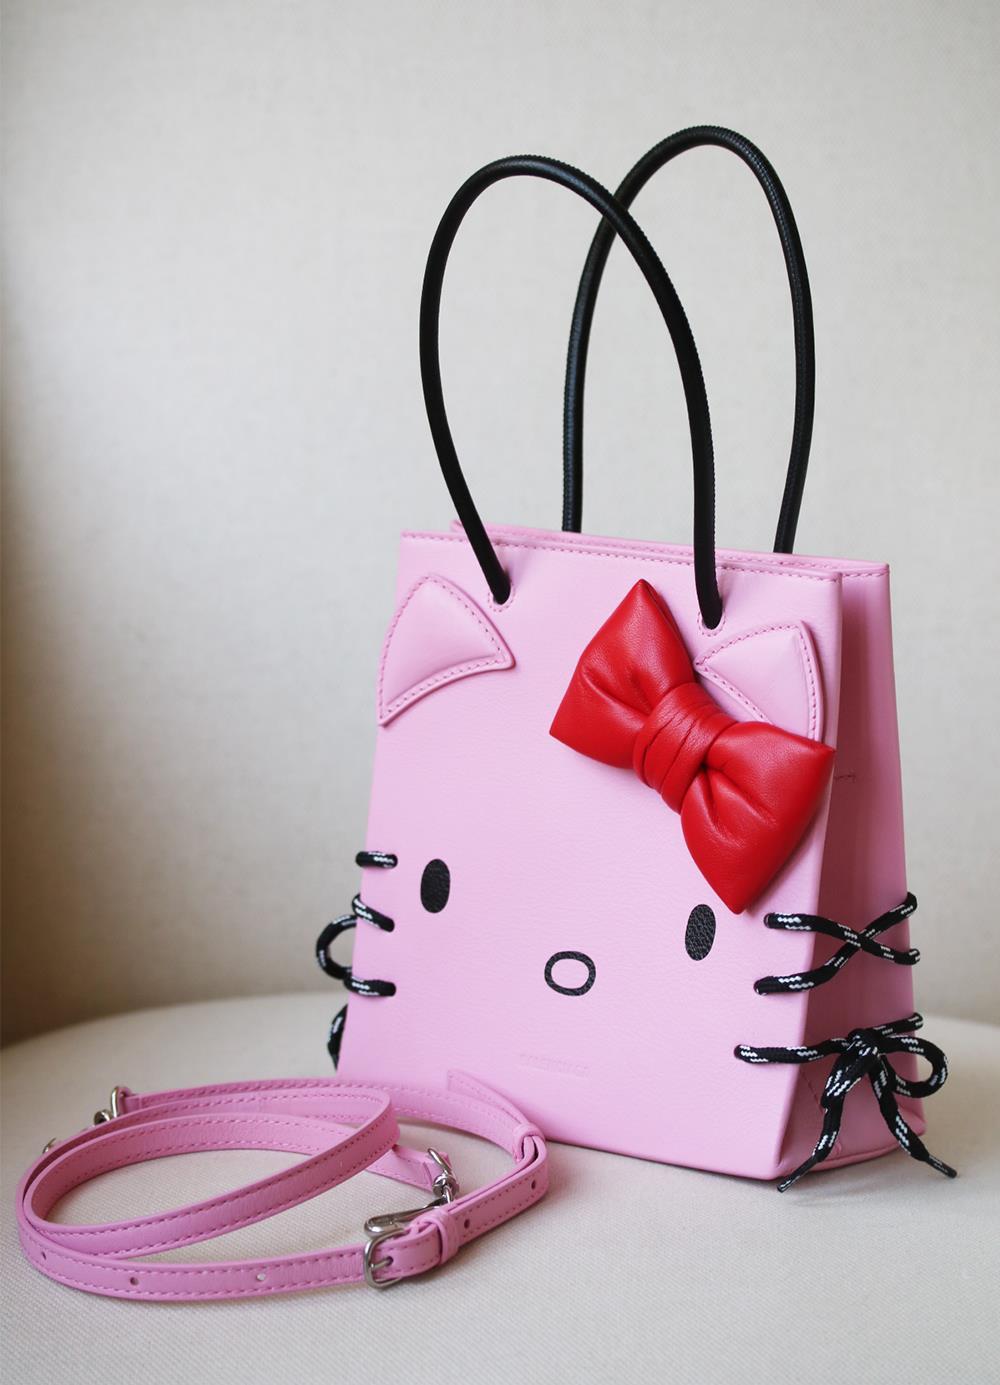 Balenciaga x Hello Kitty Printed Leather Crossbody Bag In Excellent Condition In London, GB